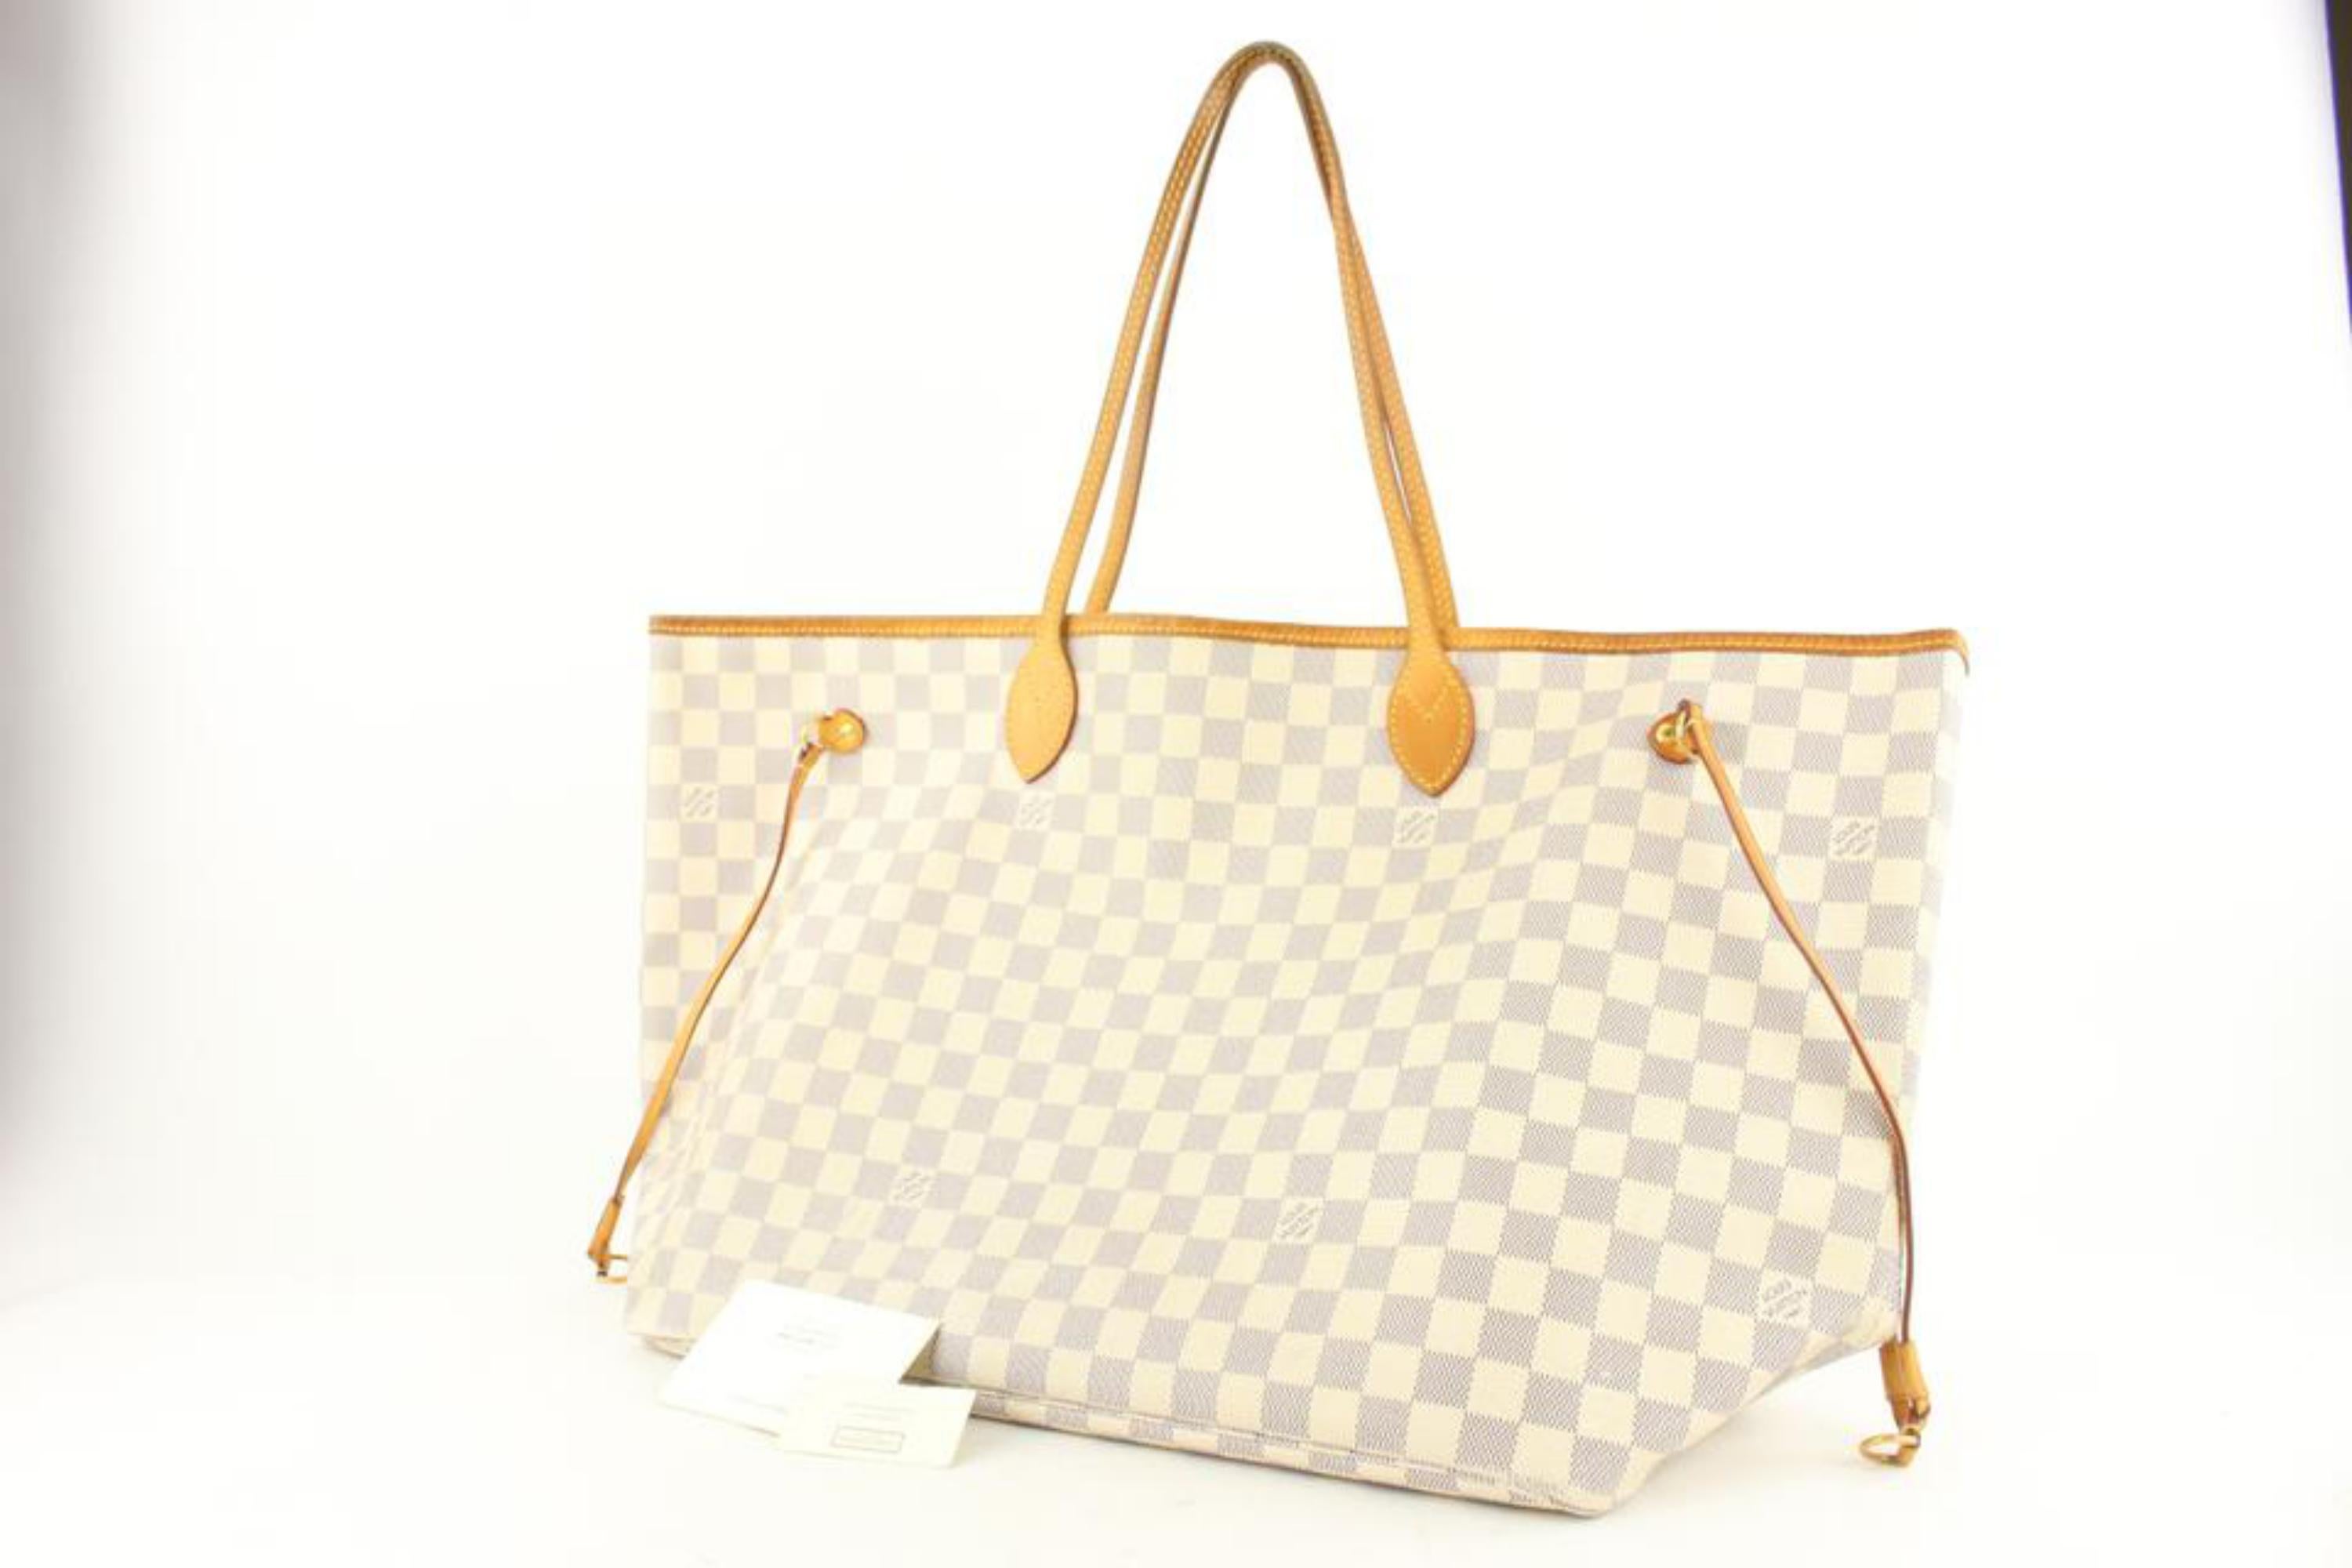 Louis Vuitton Damier Azur Neverfull GM Tote bag Upcycle Ready 2LV48
Date Code/Serial Number: TJ2161
Made In: France
Measurements: Length:  21.5